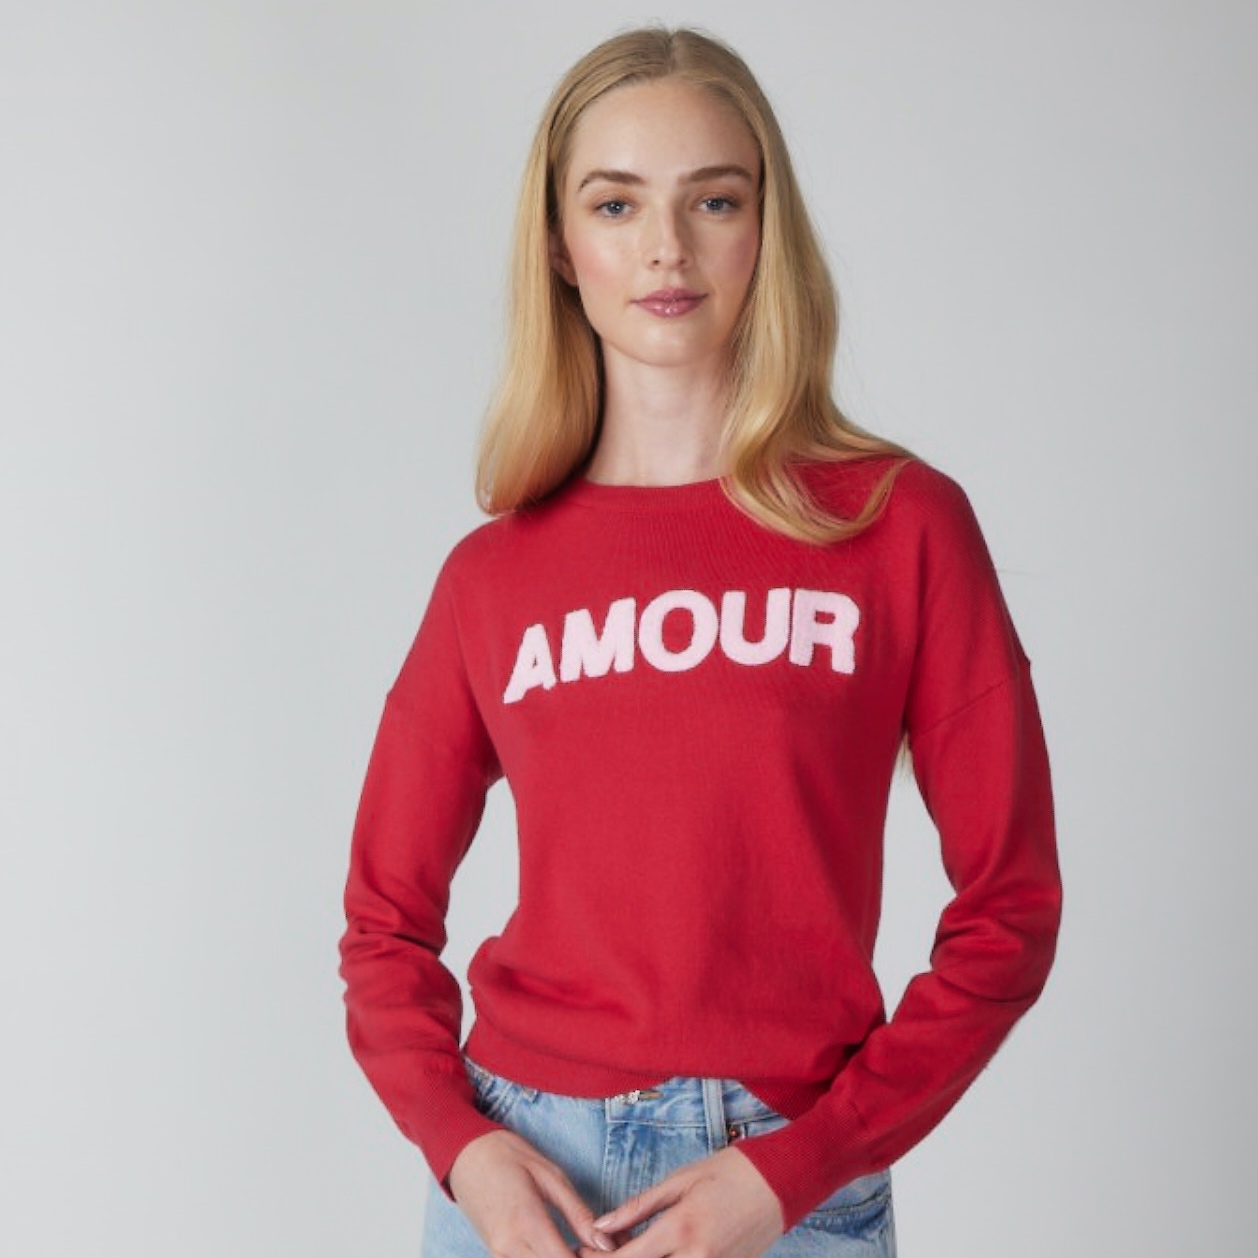 Woman in a red sweater with the word Amour written on it.